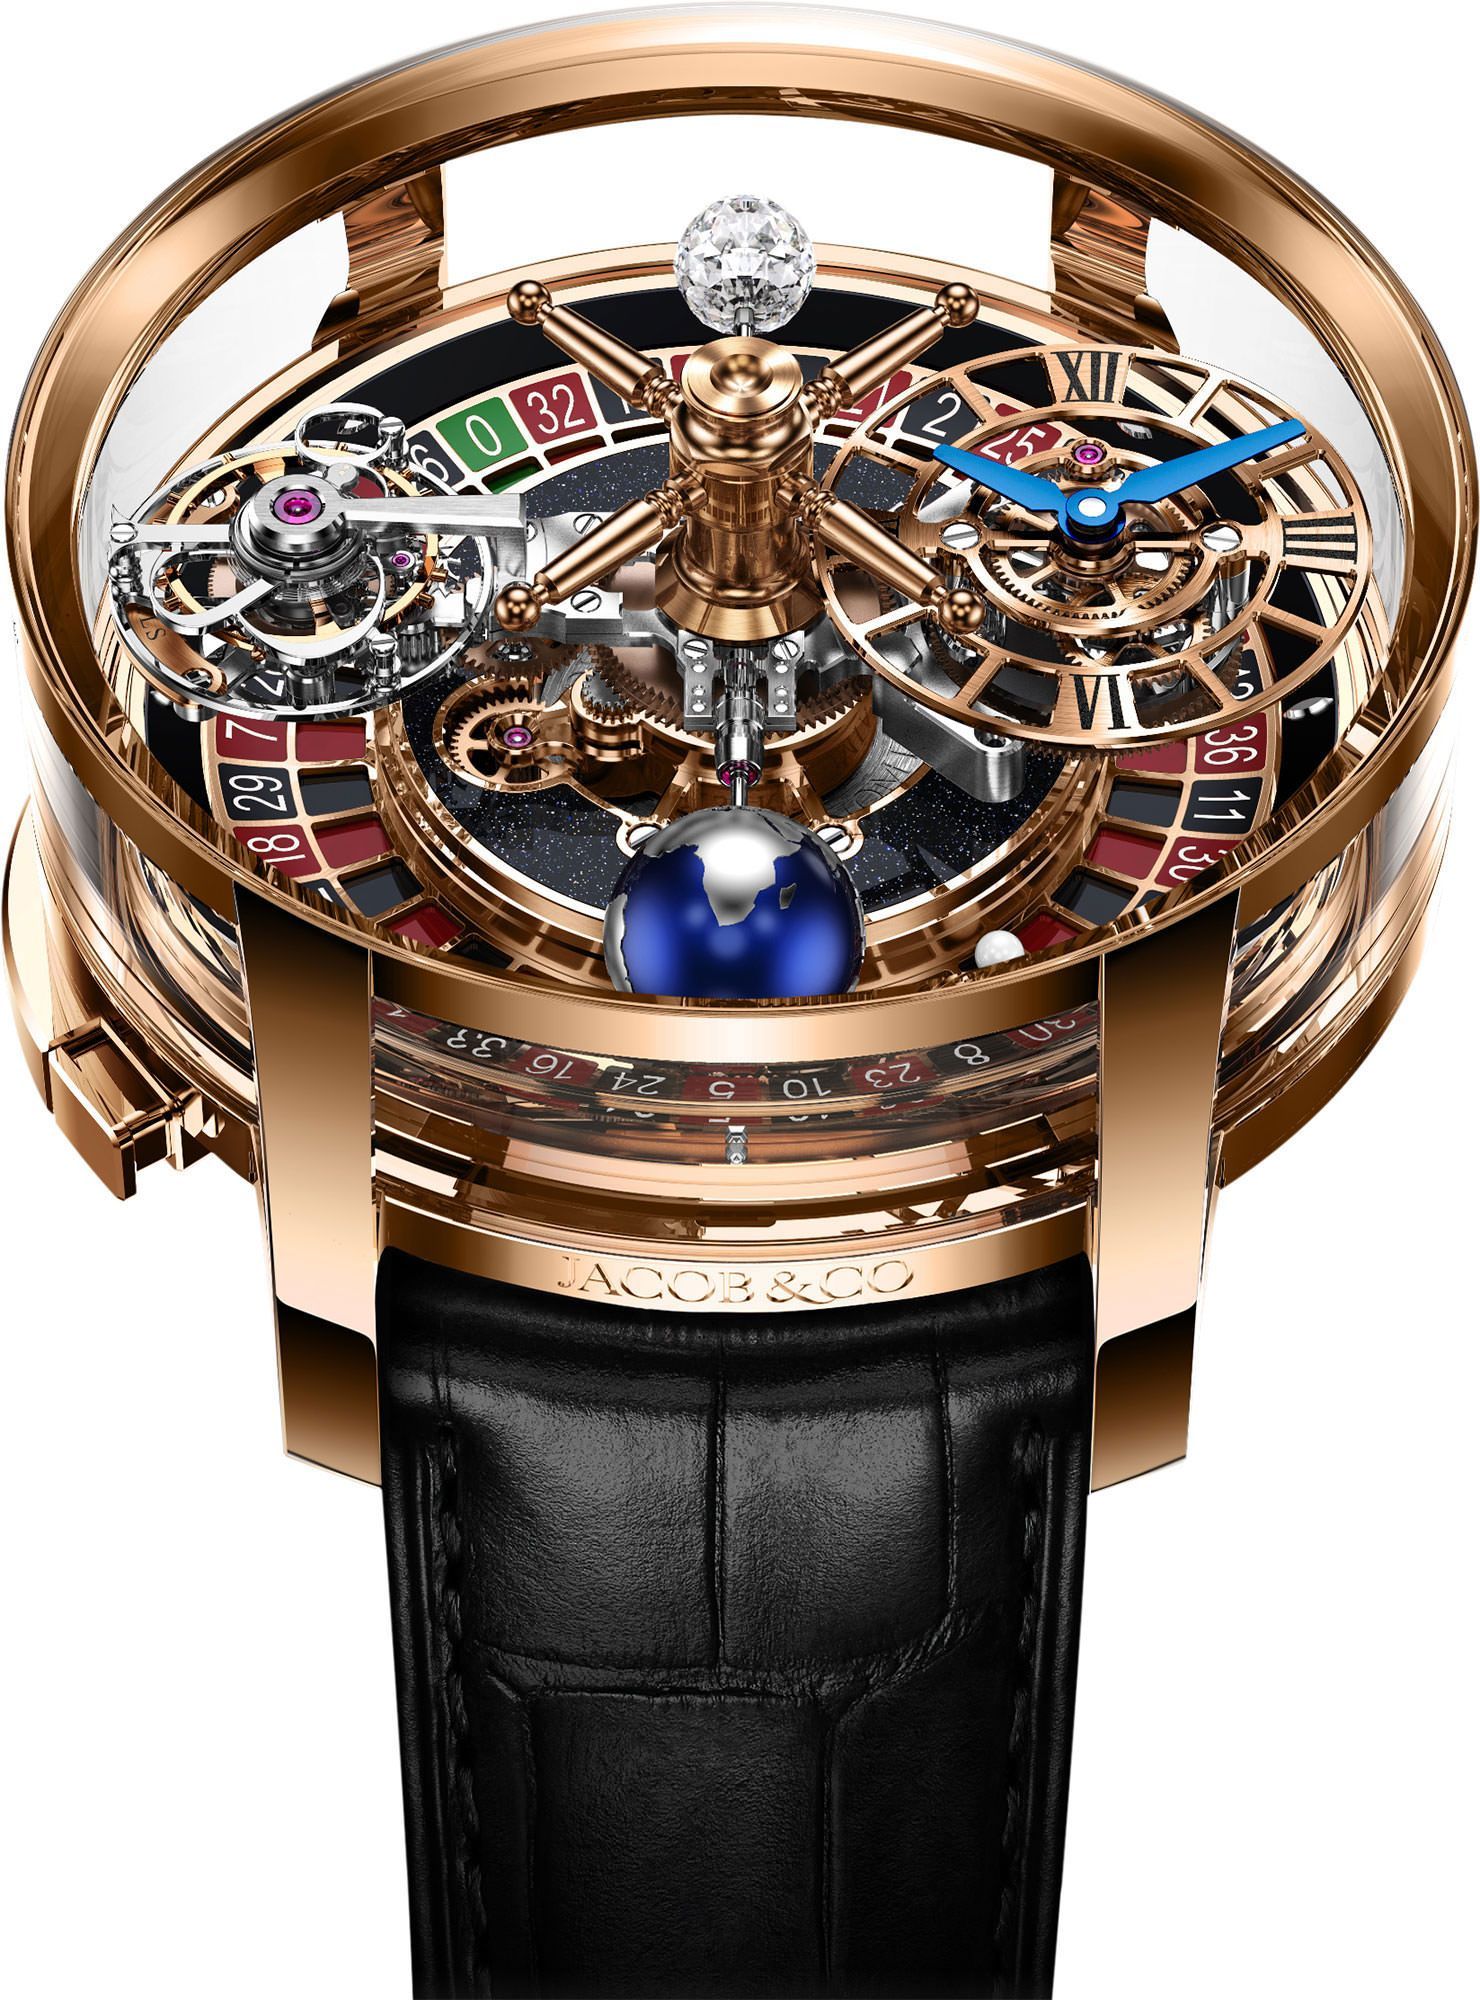 Jacob & Co. Astronomia Casino 47 mm Watch in Skeleton Dial For Men - 1